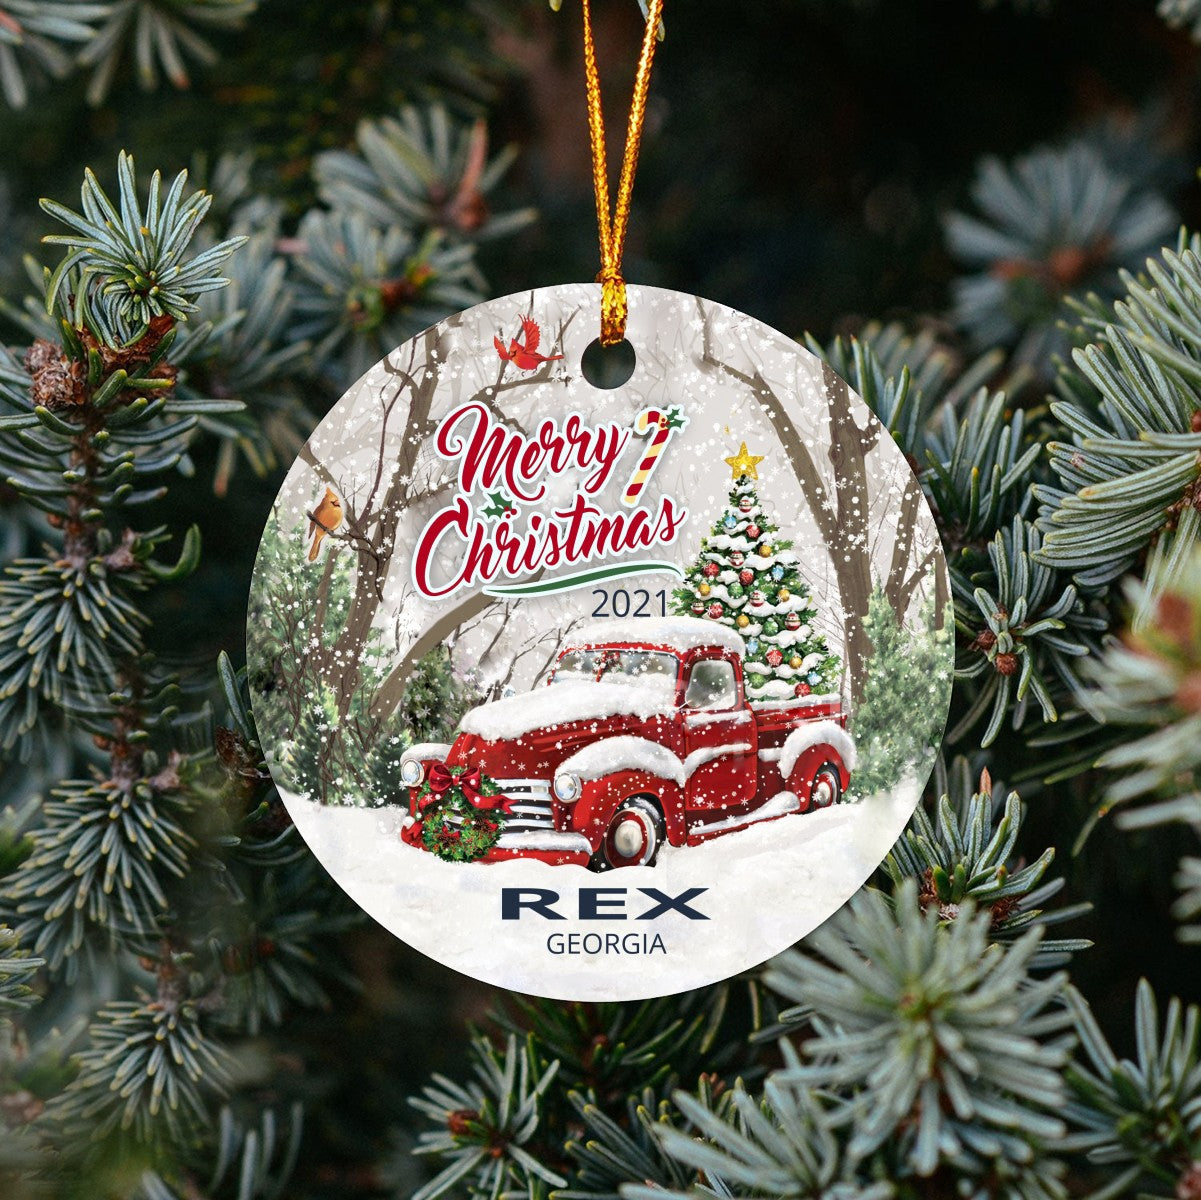 Christmas Tree Ornaments Rex - Ornament With Name City, State Rex Georgia GA Ornament - Red Truck Xmas Ornaments 3'' Plastic Gift For Family, Friend And Housewarming